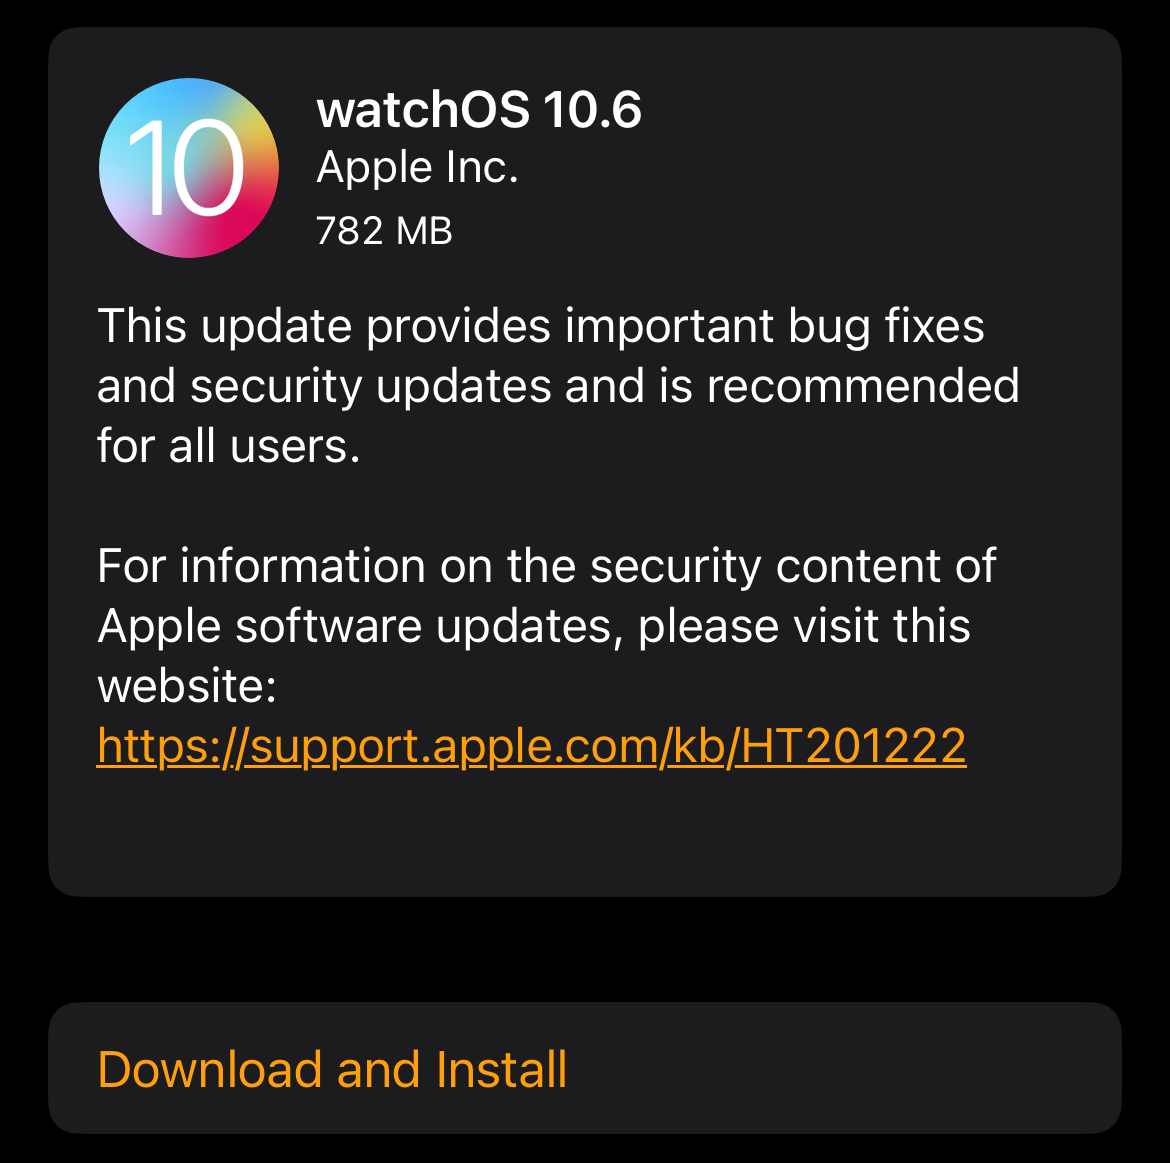 Downloading and installing a watchOS update via the Watch app for iPhone.